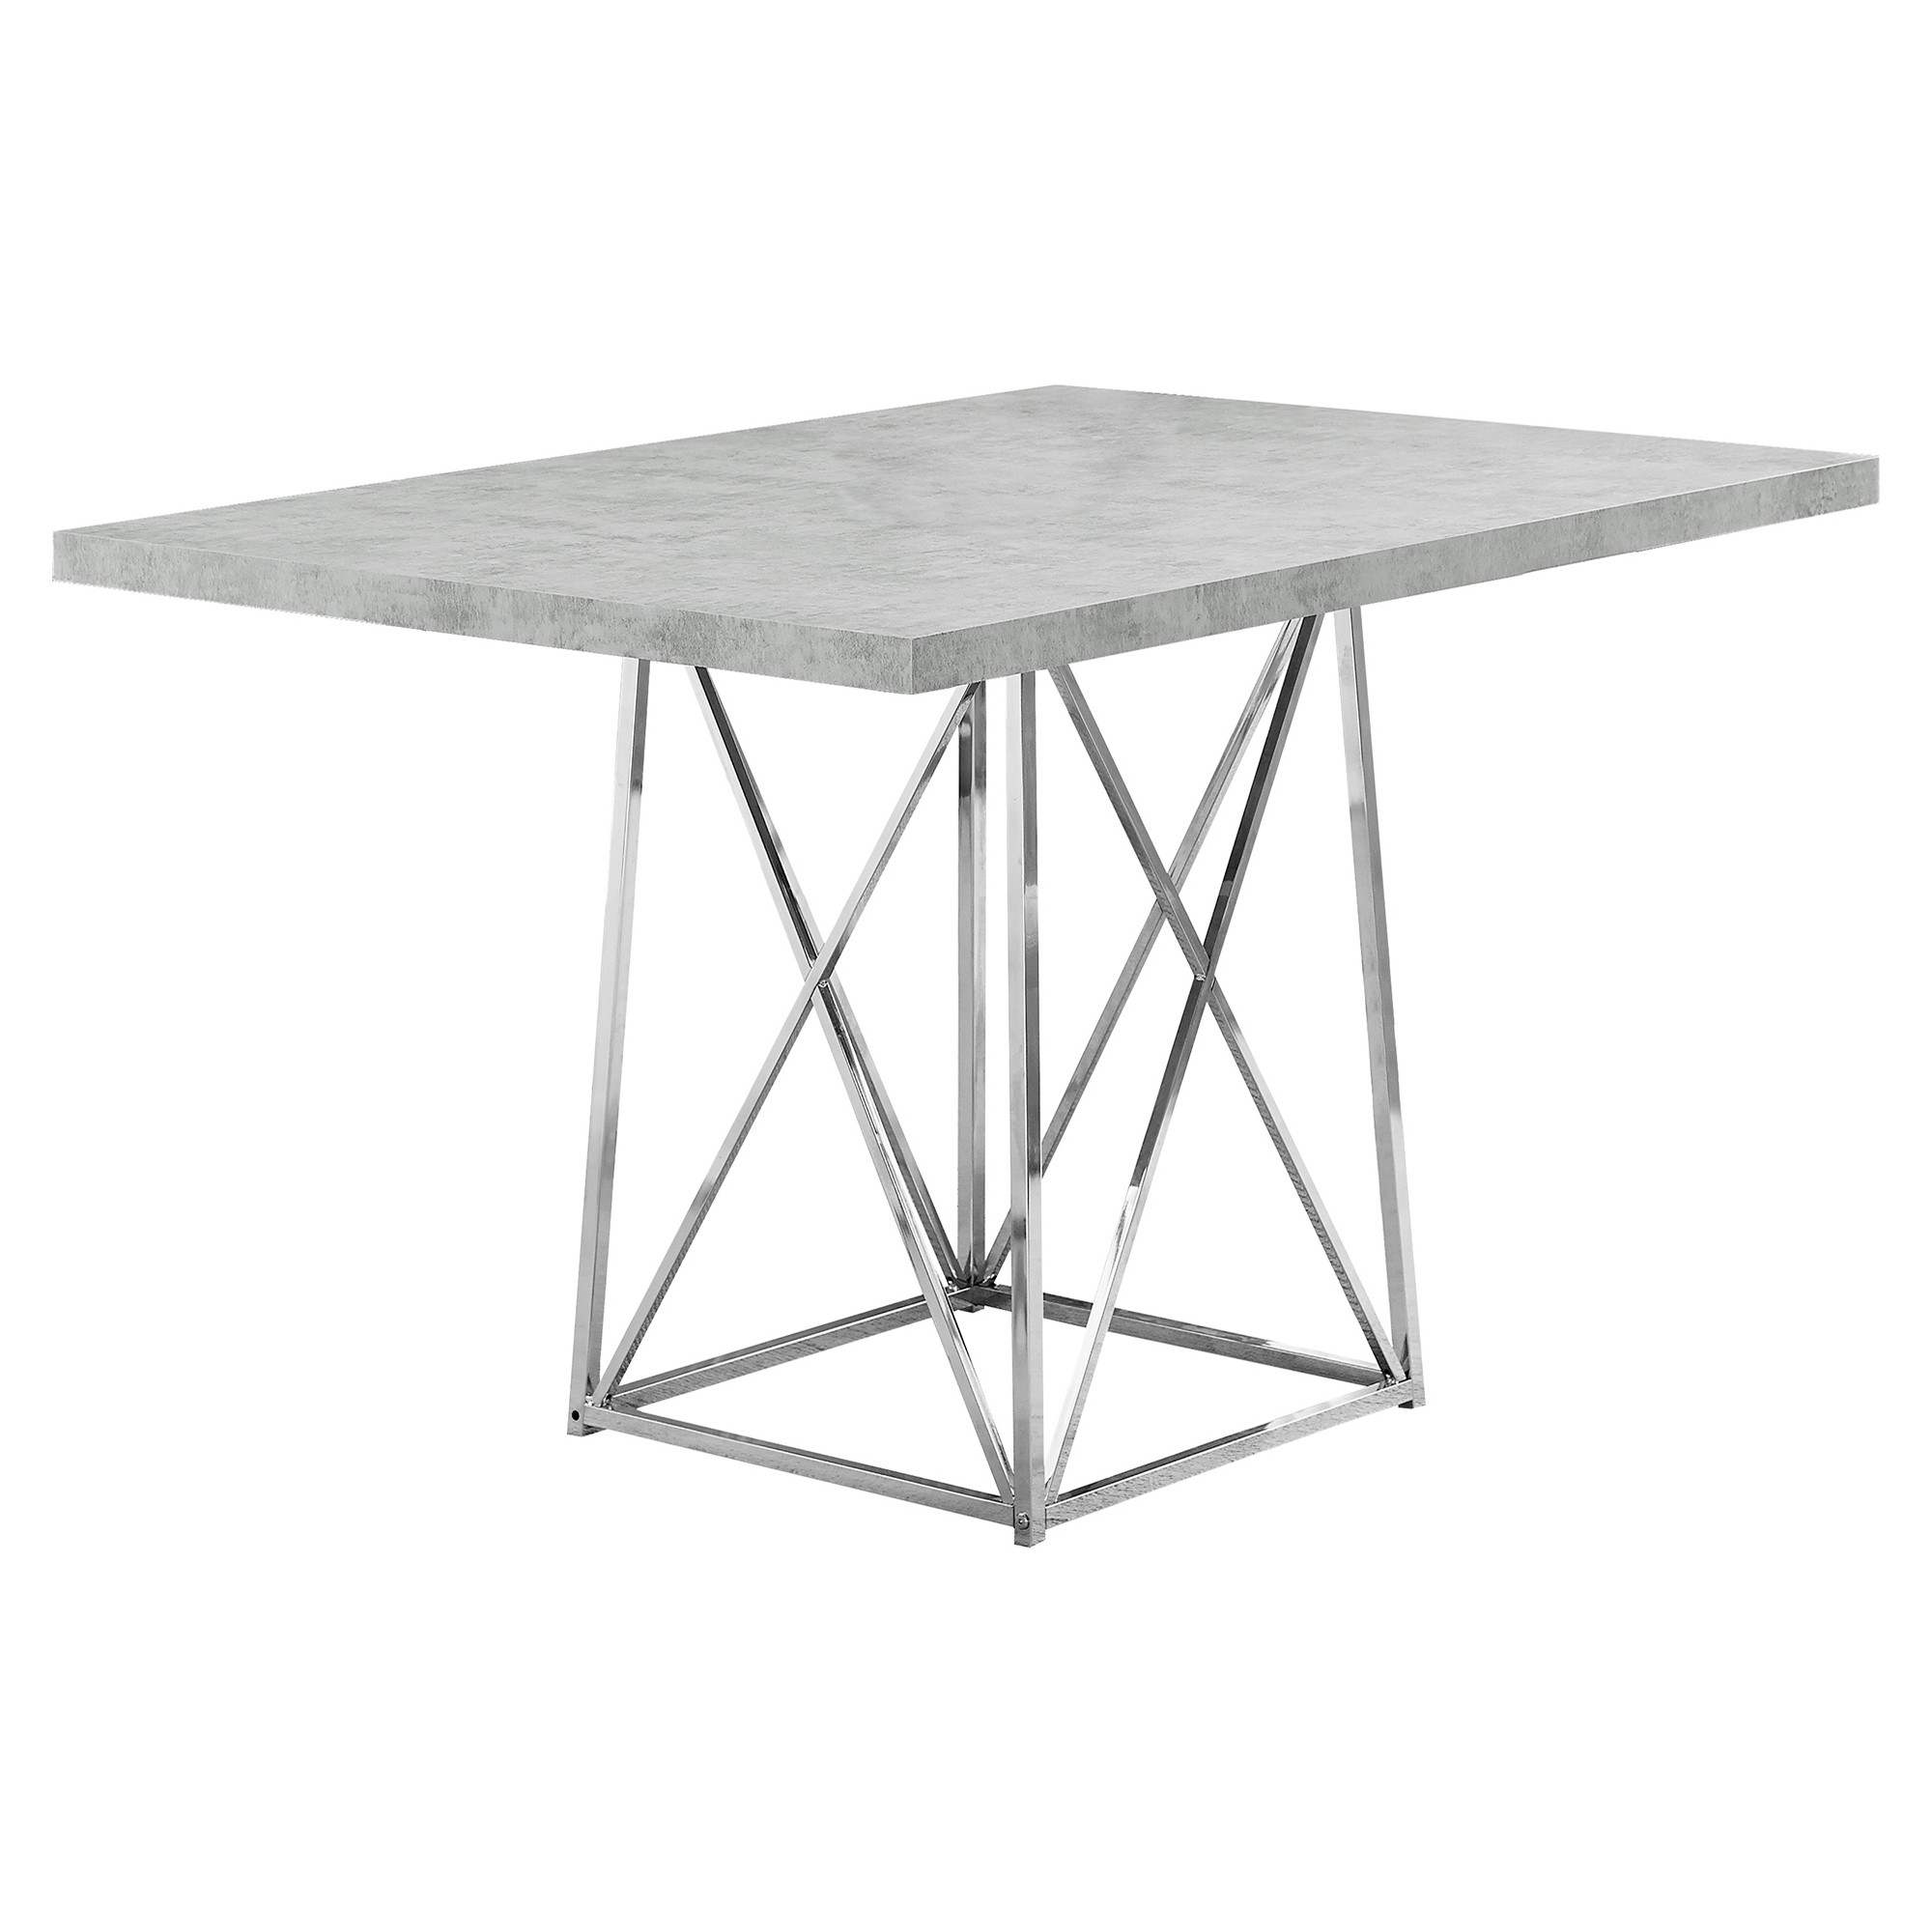 36" x 48" x 31" Grey Particle Board and Chrome Metal Dining Table